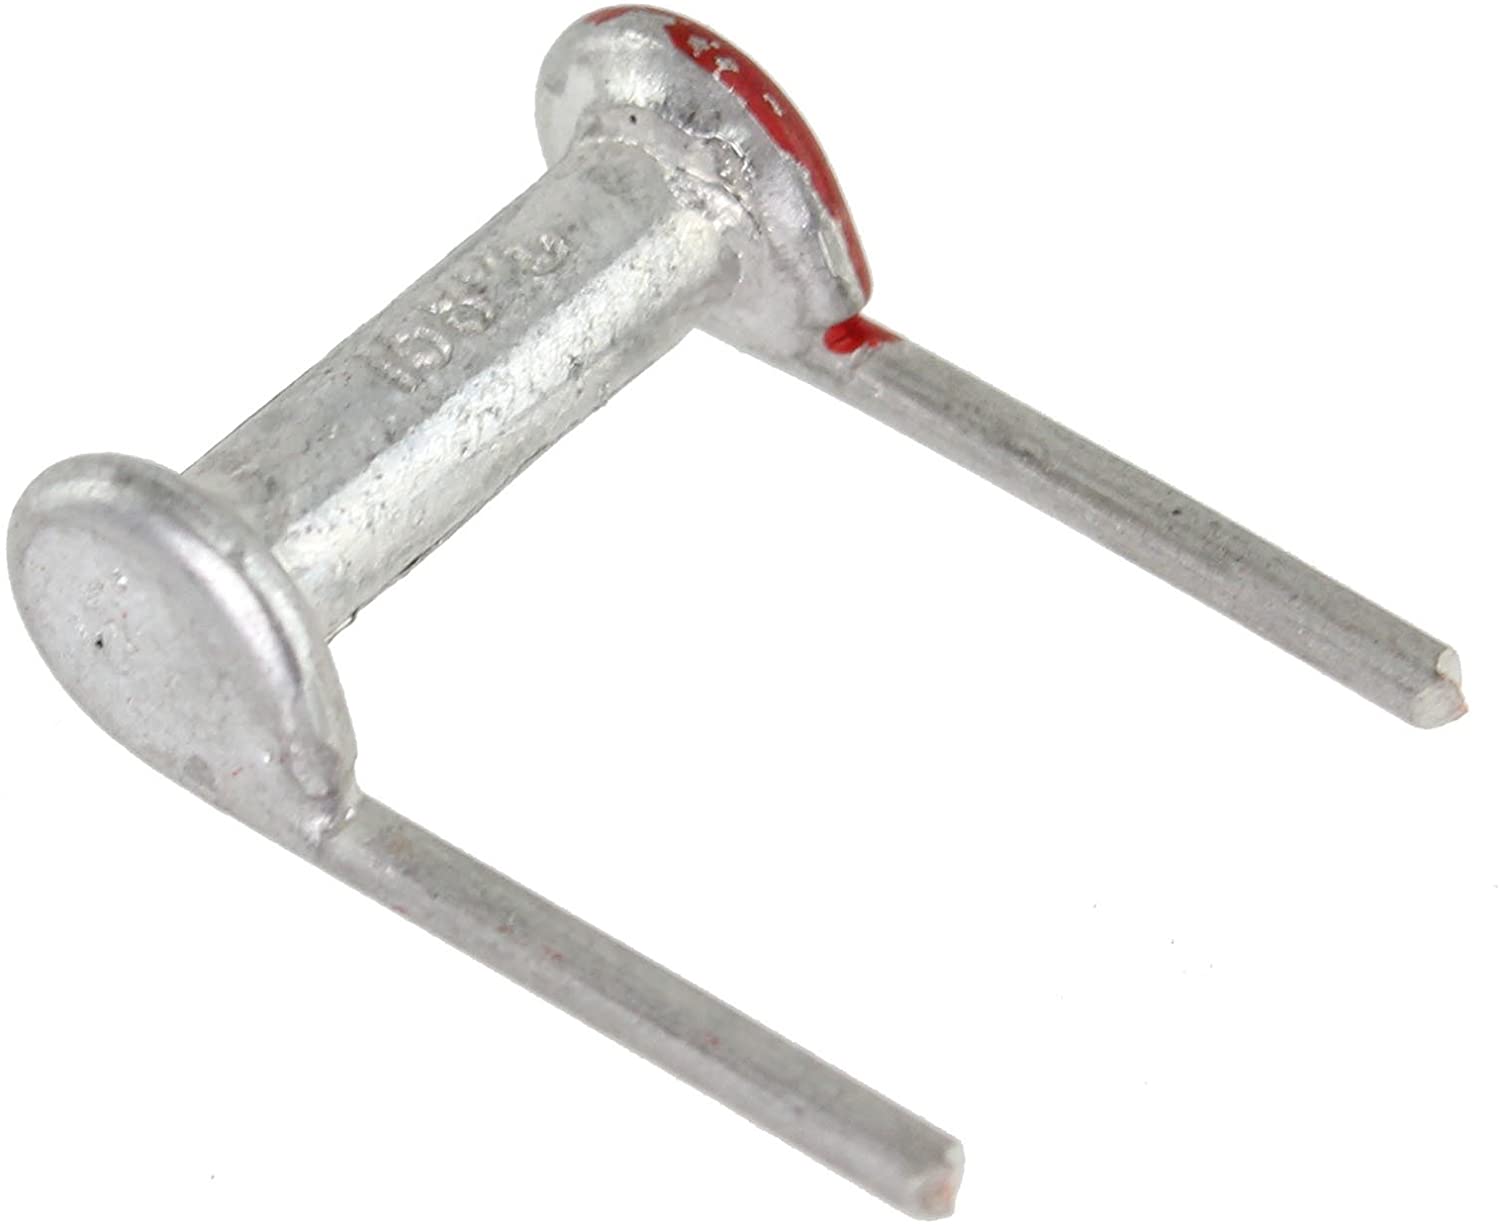 Creda Storage Heater Thermal Fuse Link (158ºc, Red spot) 0850656